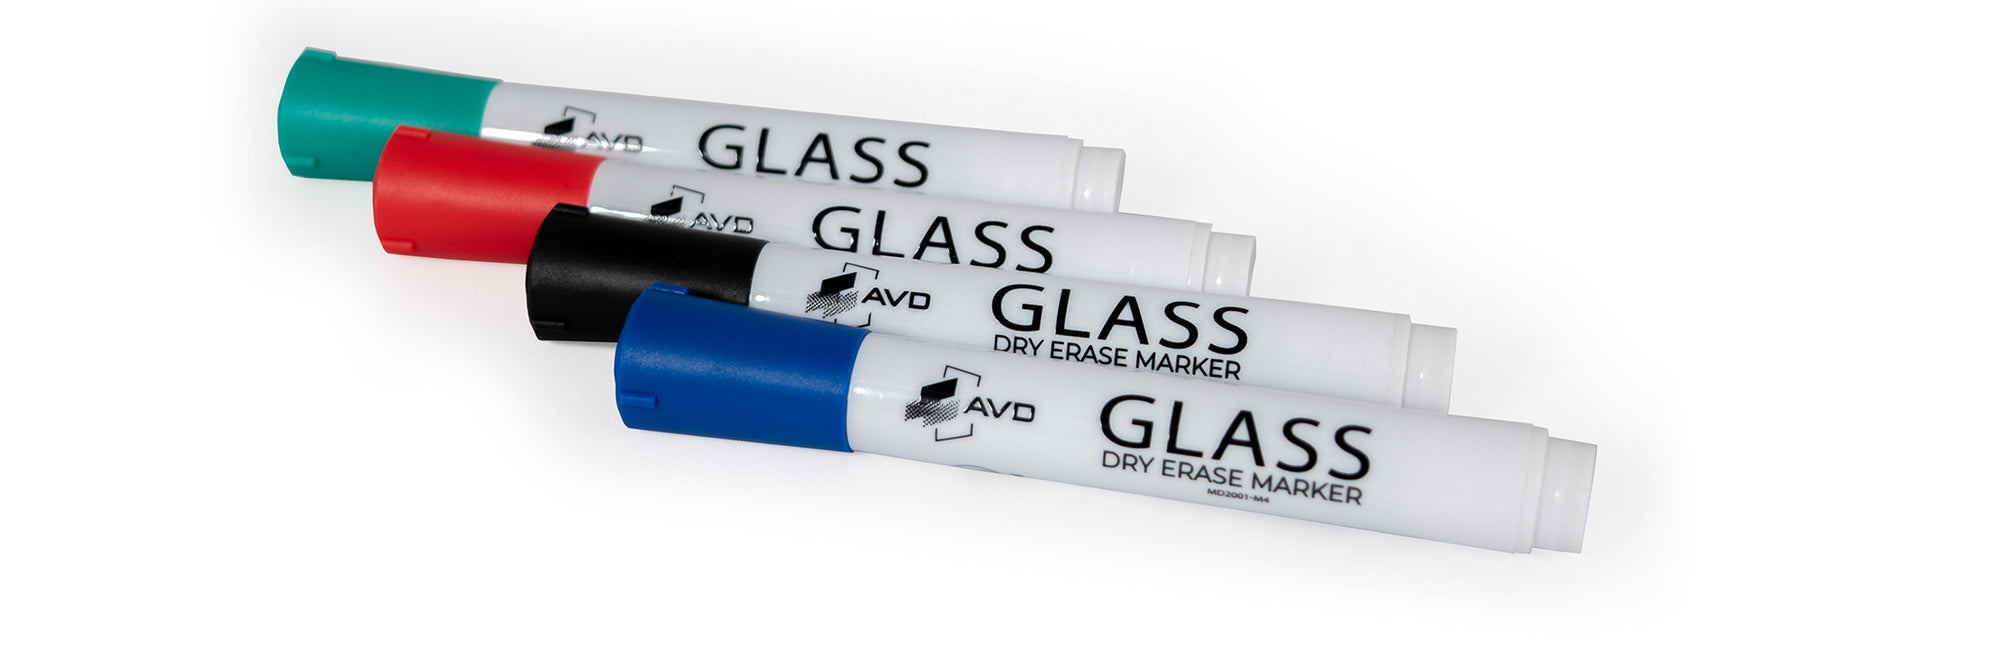 Audio Visual Direct Dry Erase Markers for Glass Boards  Set of 4 ( Red, Blue, Green , Black)